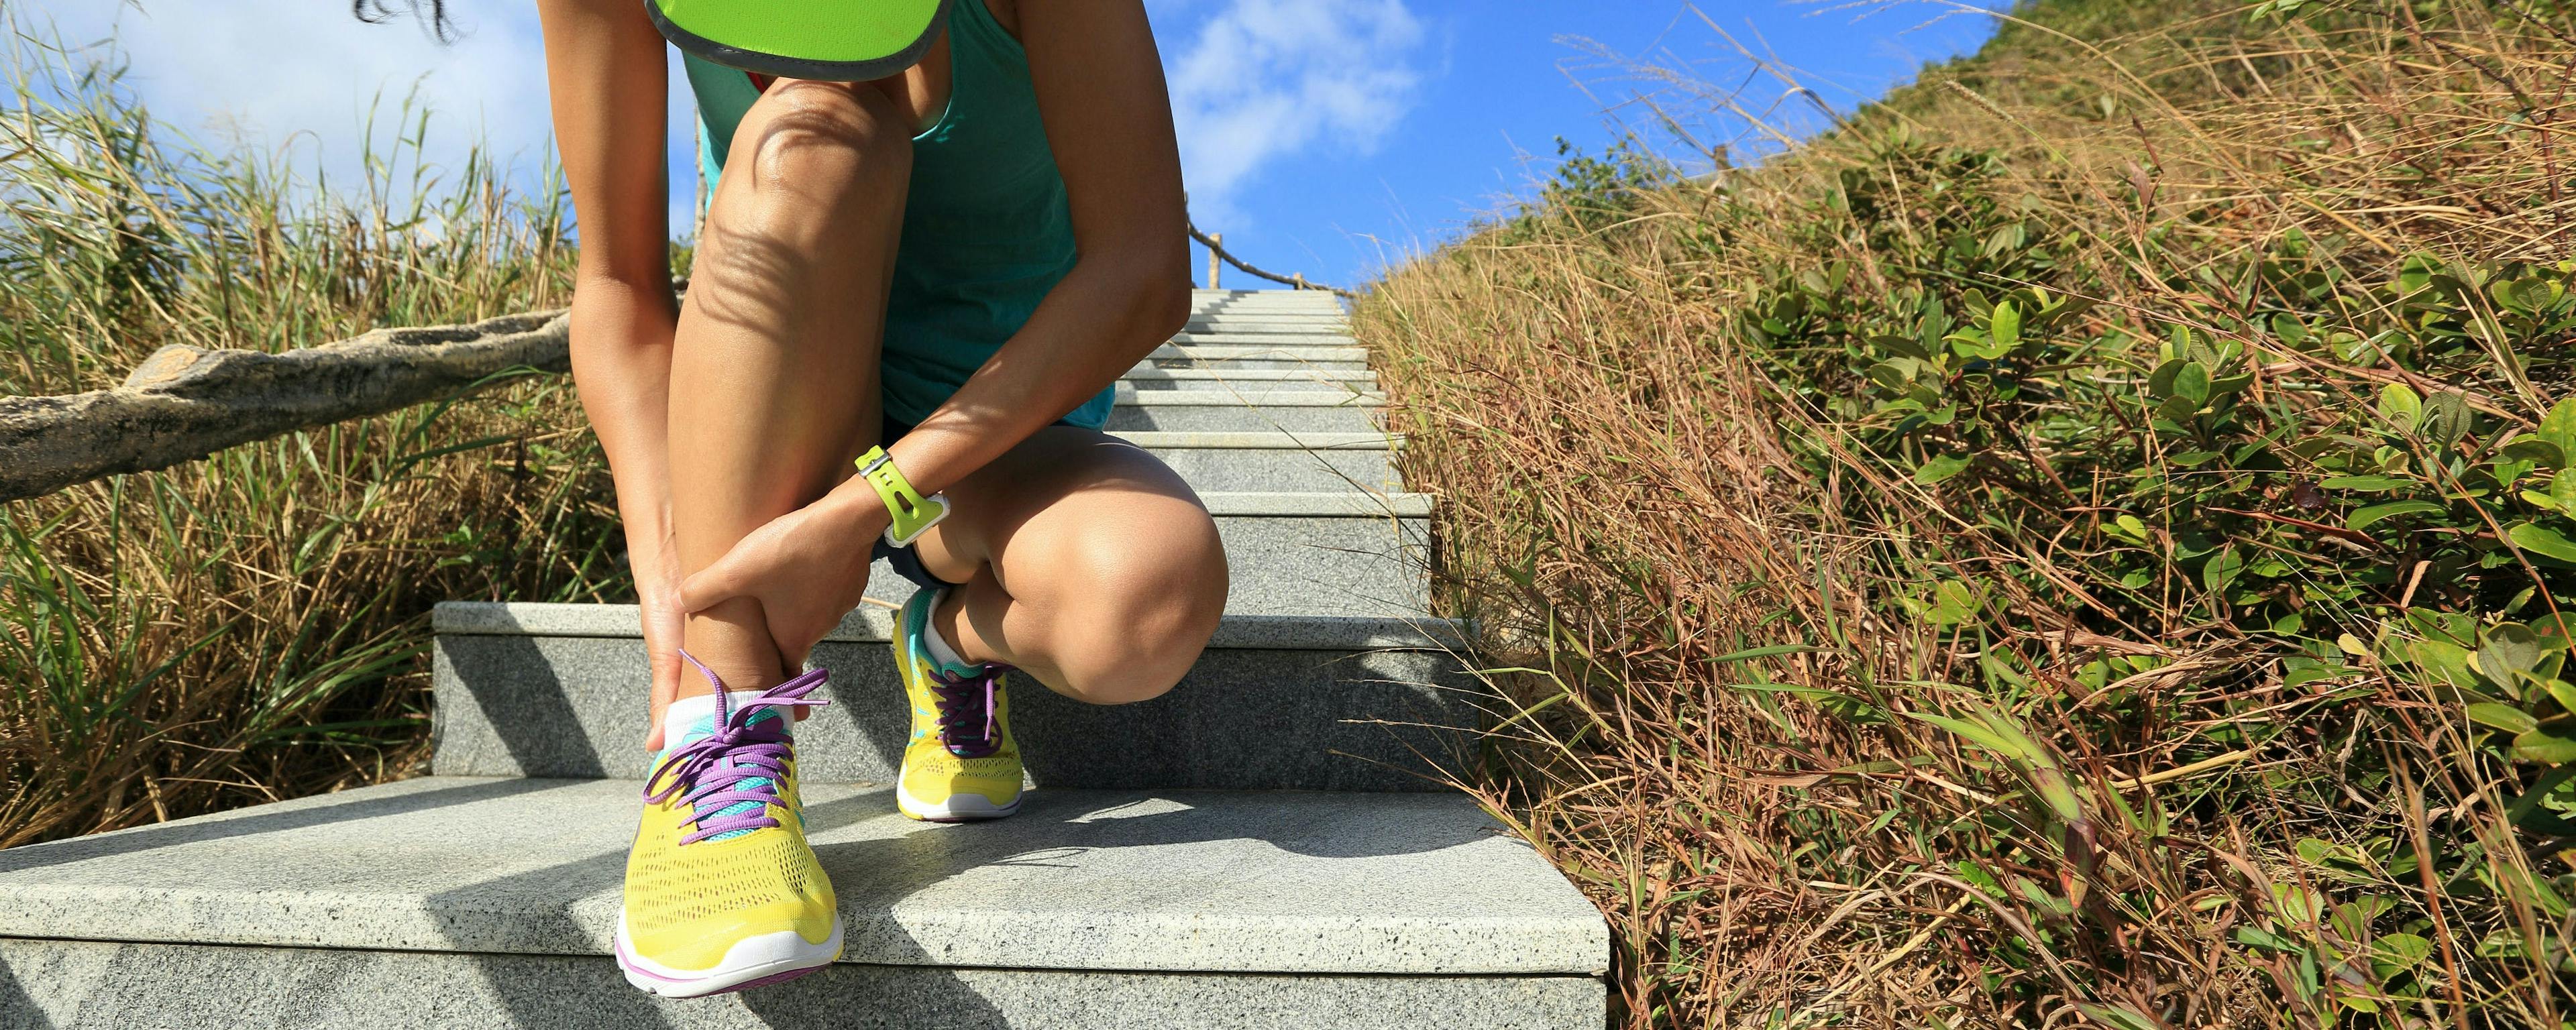 Injury prevention tips for trail runners